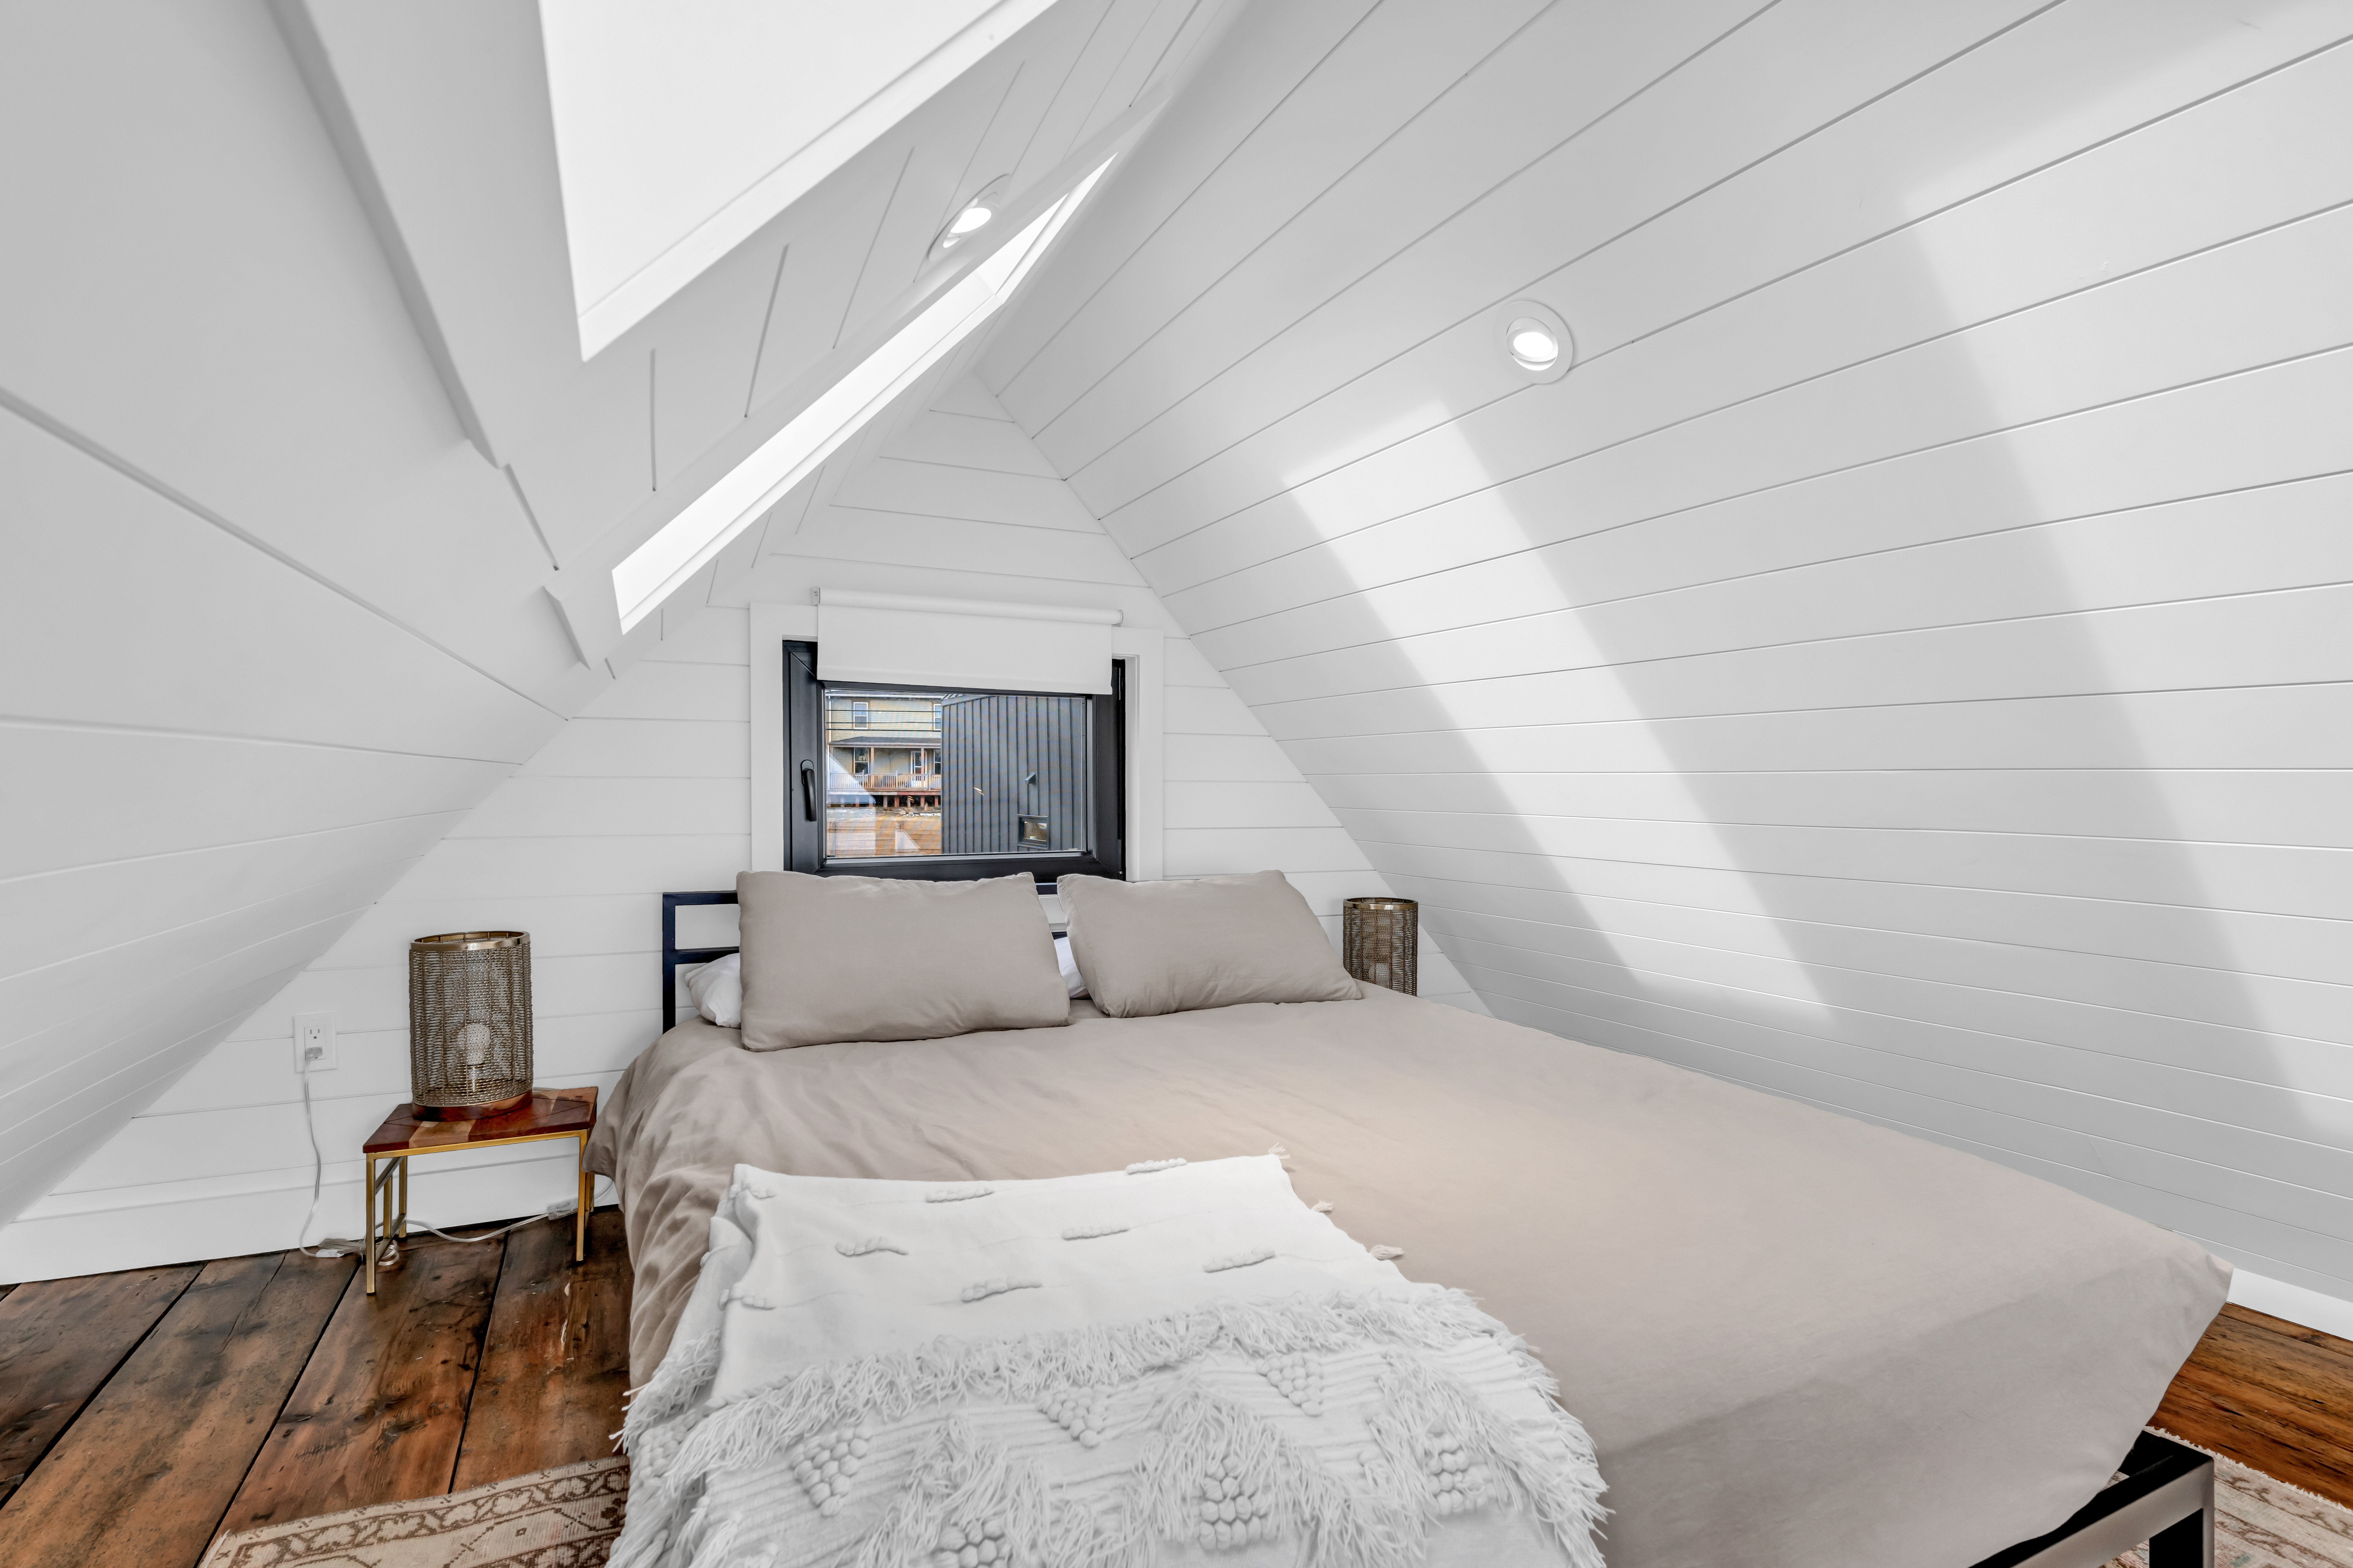 A bright loft bedroom area with a big bed, hardwood flooring, and a white-painted shiplap ceiling with skylights.